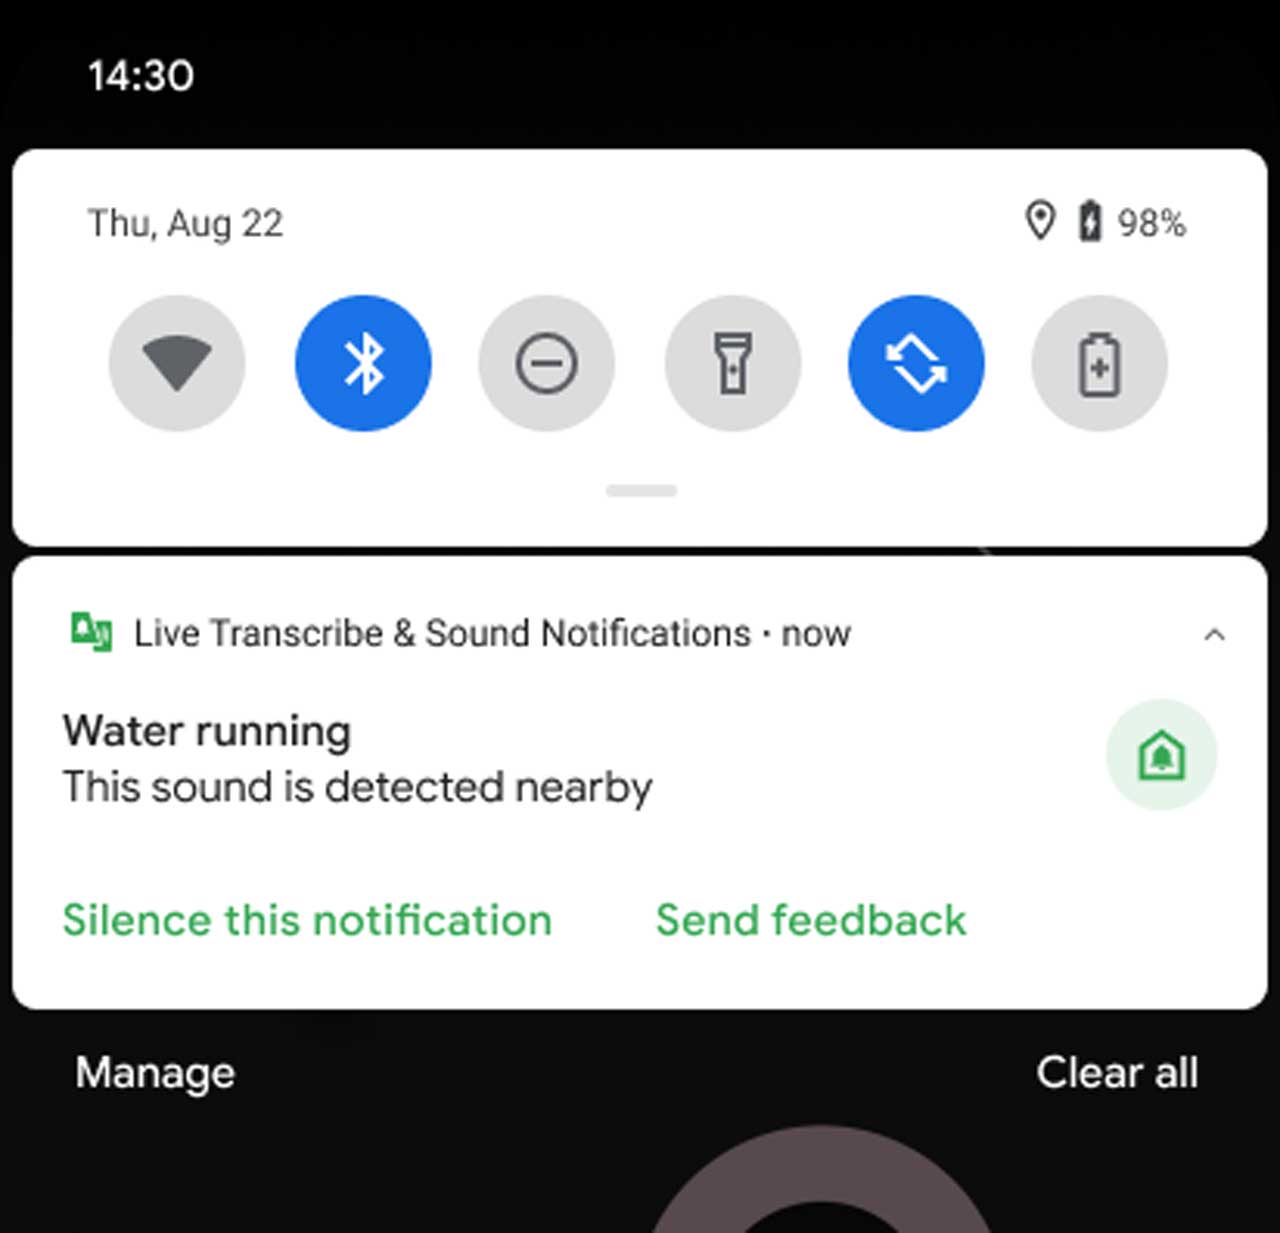 Android gains new Sound Notifications feature aimed at people with